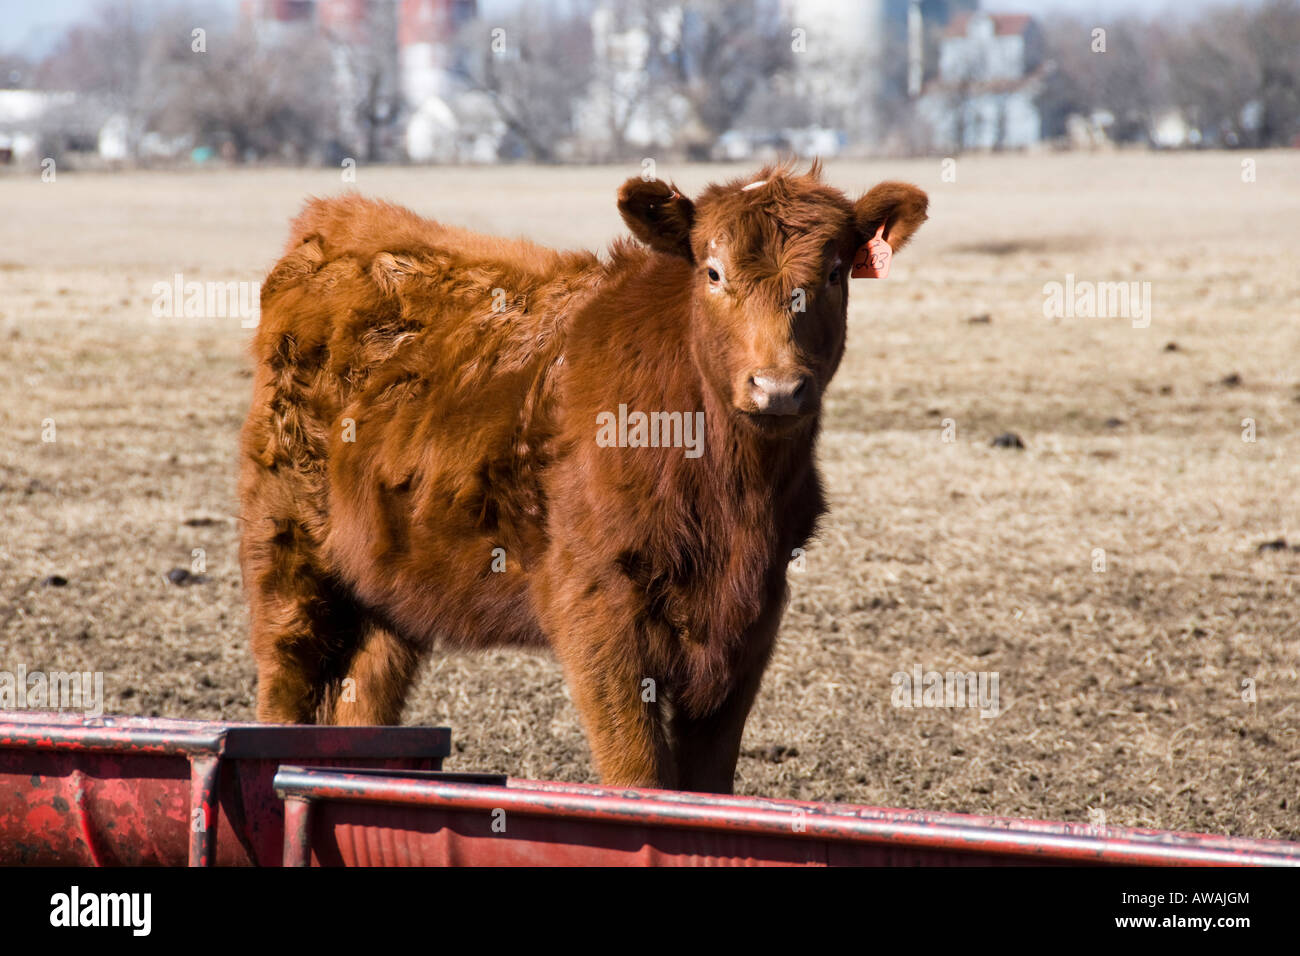 A calf in the countryside in Northeastern Kansas, USA. Stock Photo